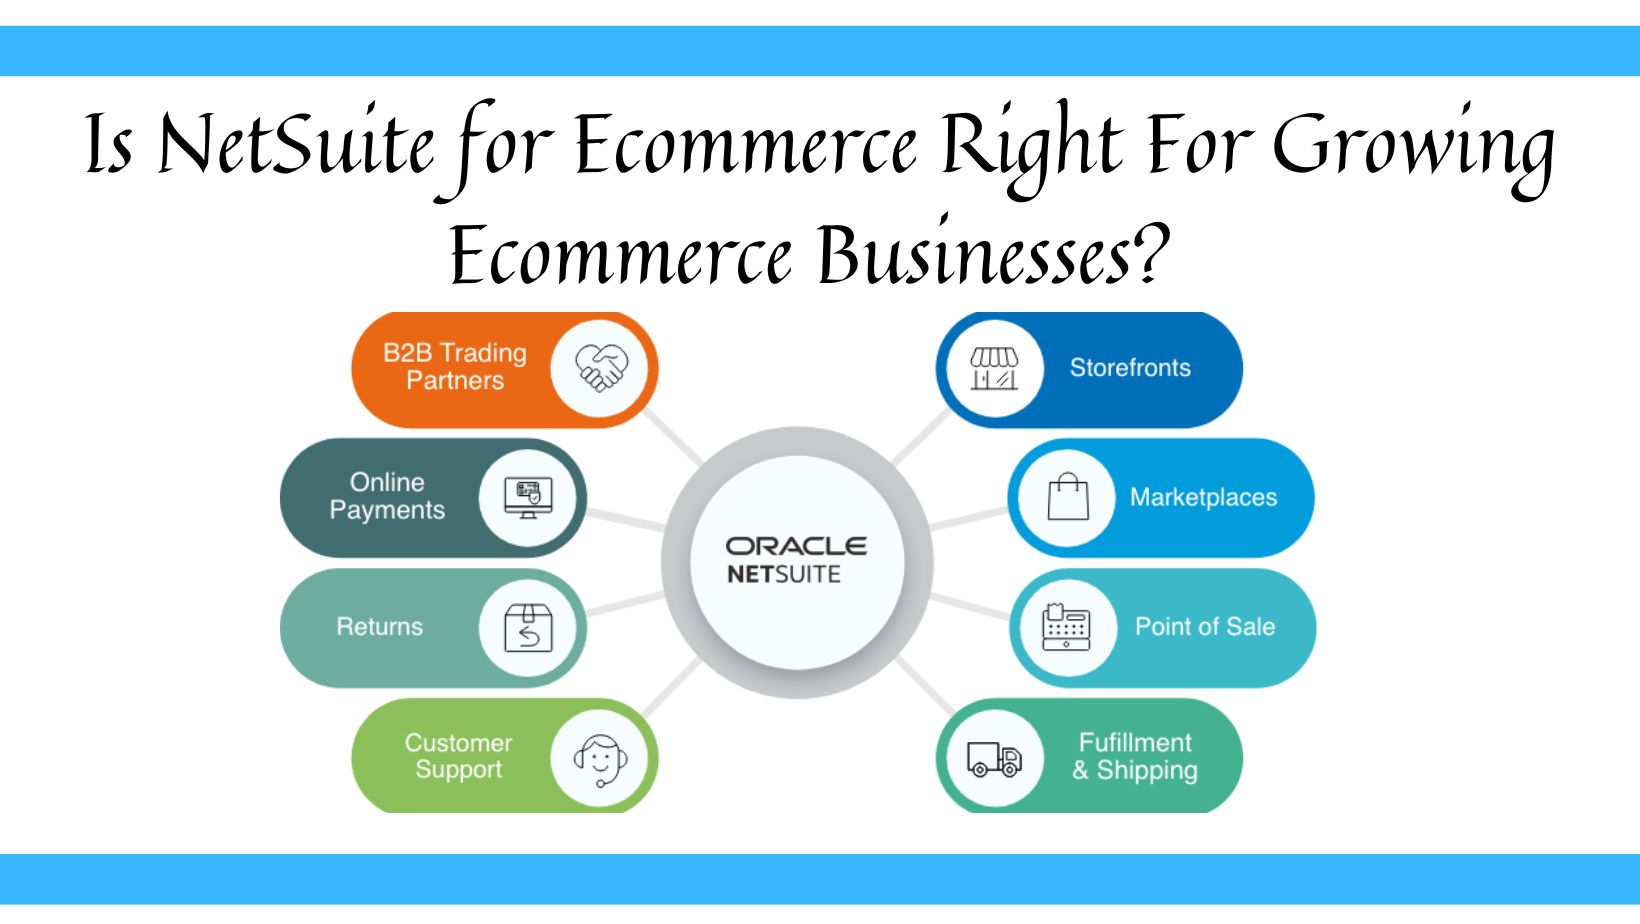 Is NetSuite for Ecommerce Right For Growing Ecommerce Businesses?